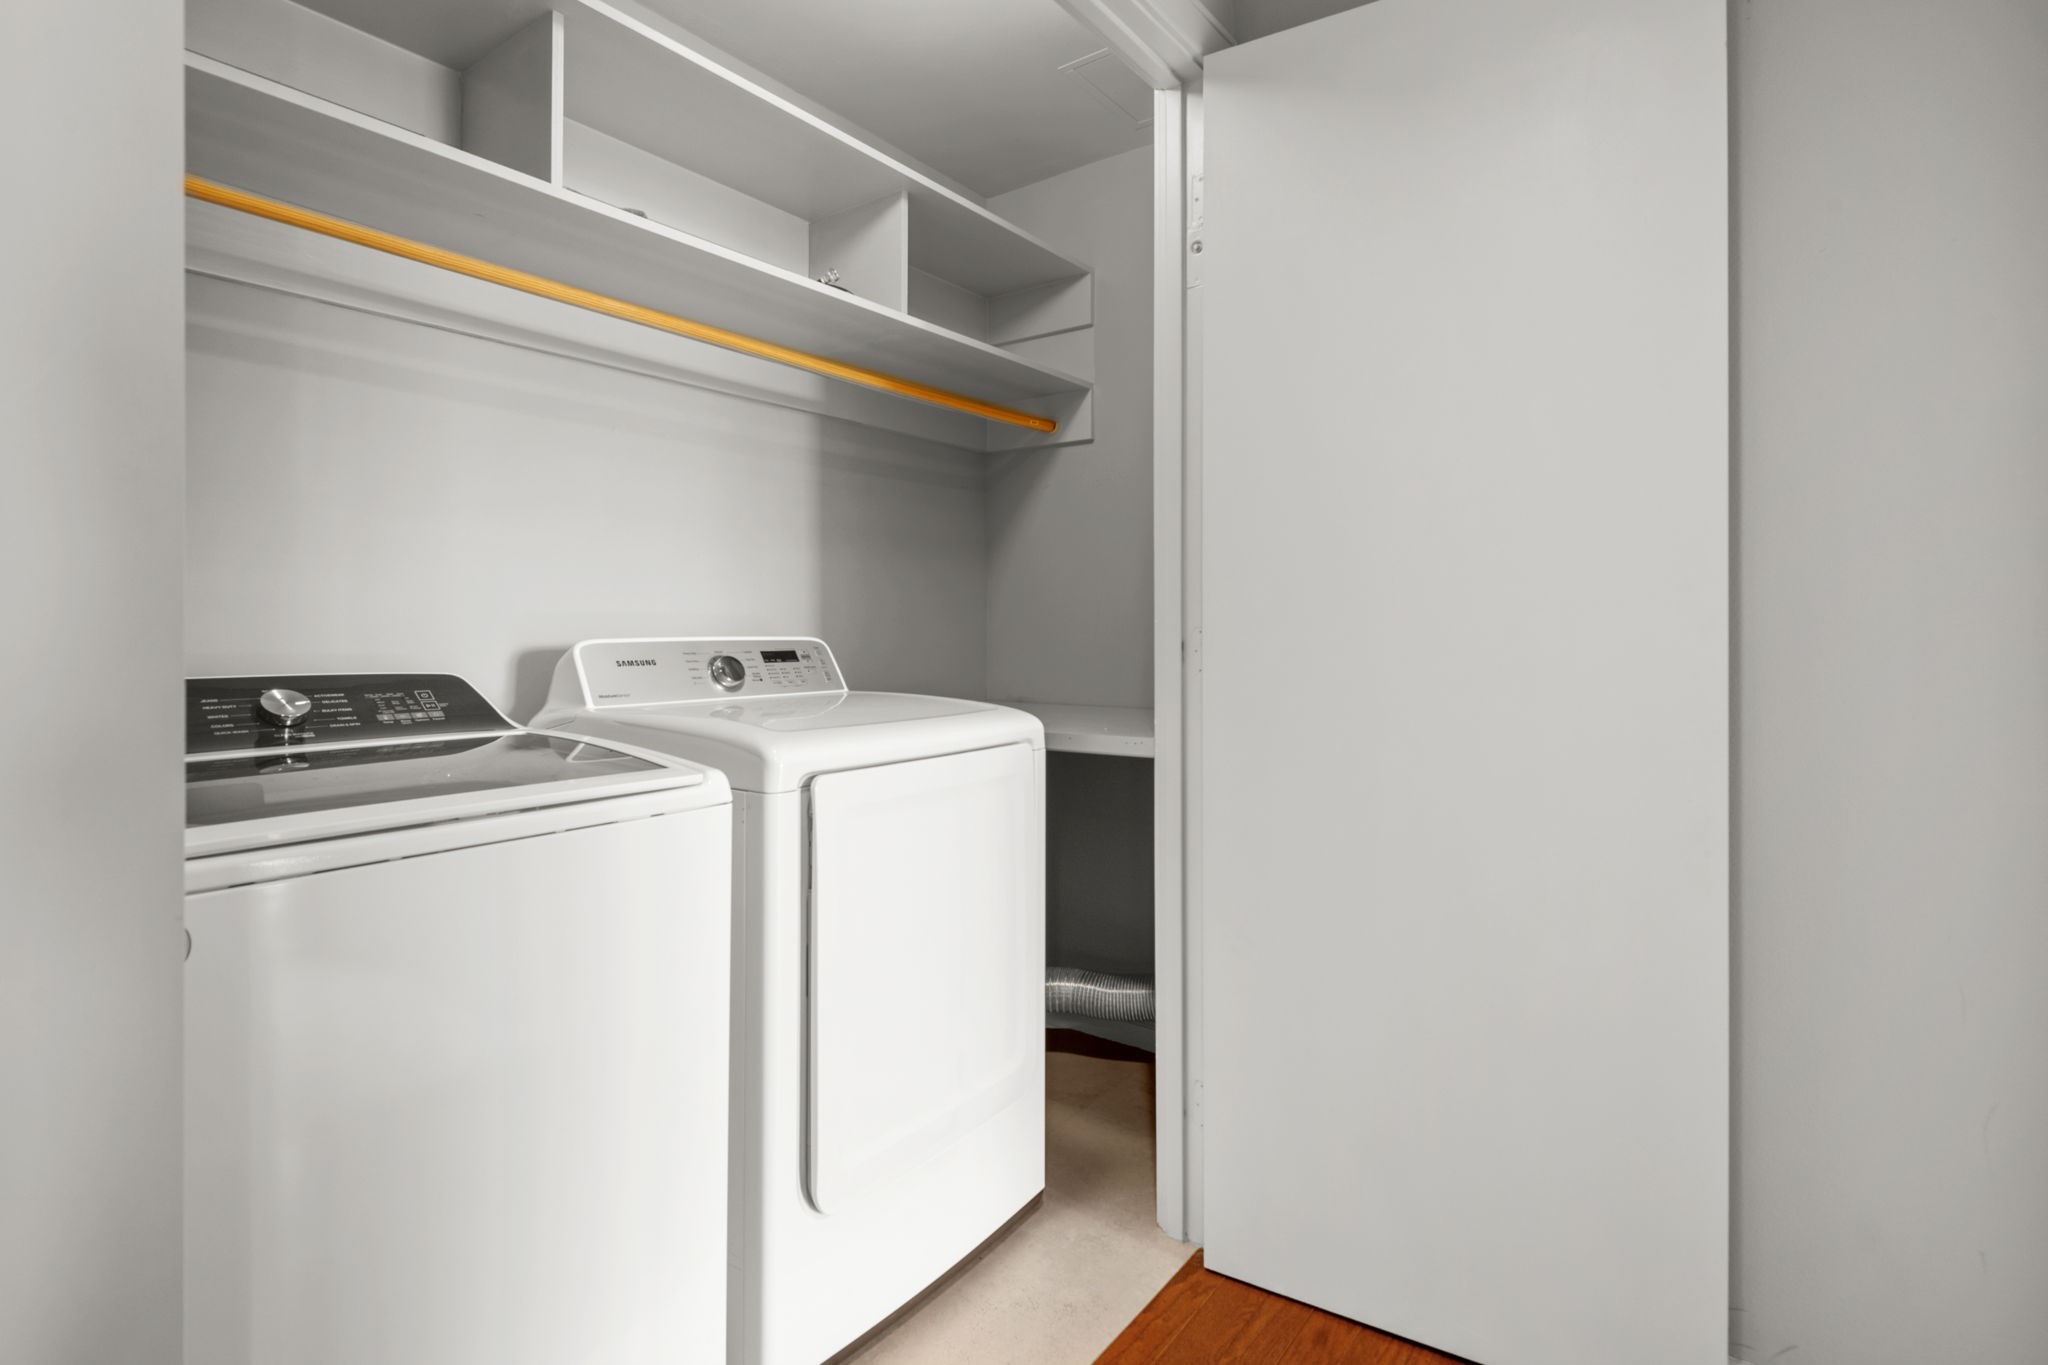 7x3 Utility - 
 Full-size washer and dryer come with the unit. Note that there are shelves and hanging rod to make this chore easier.